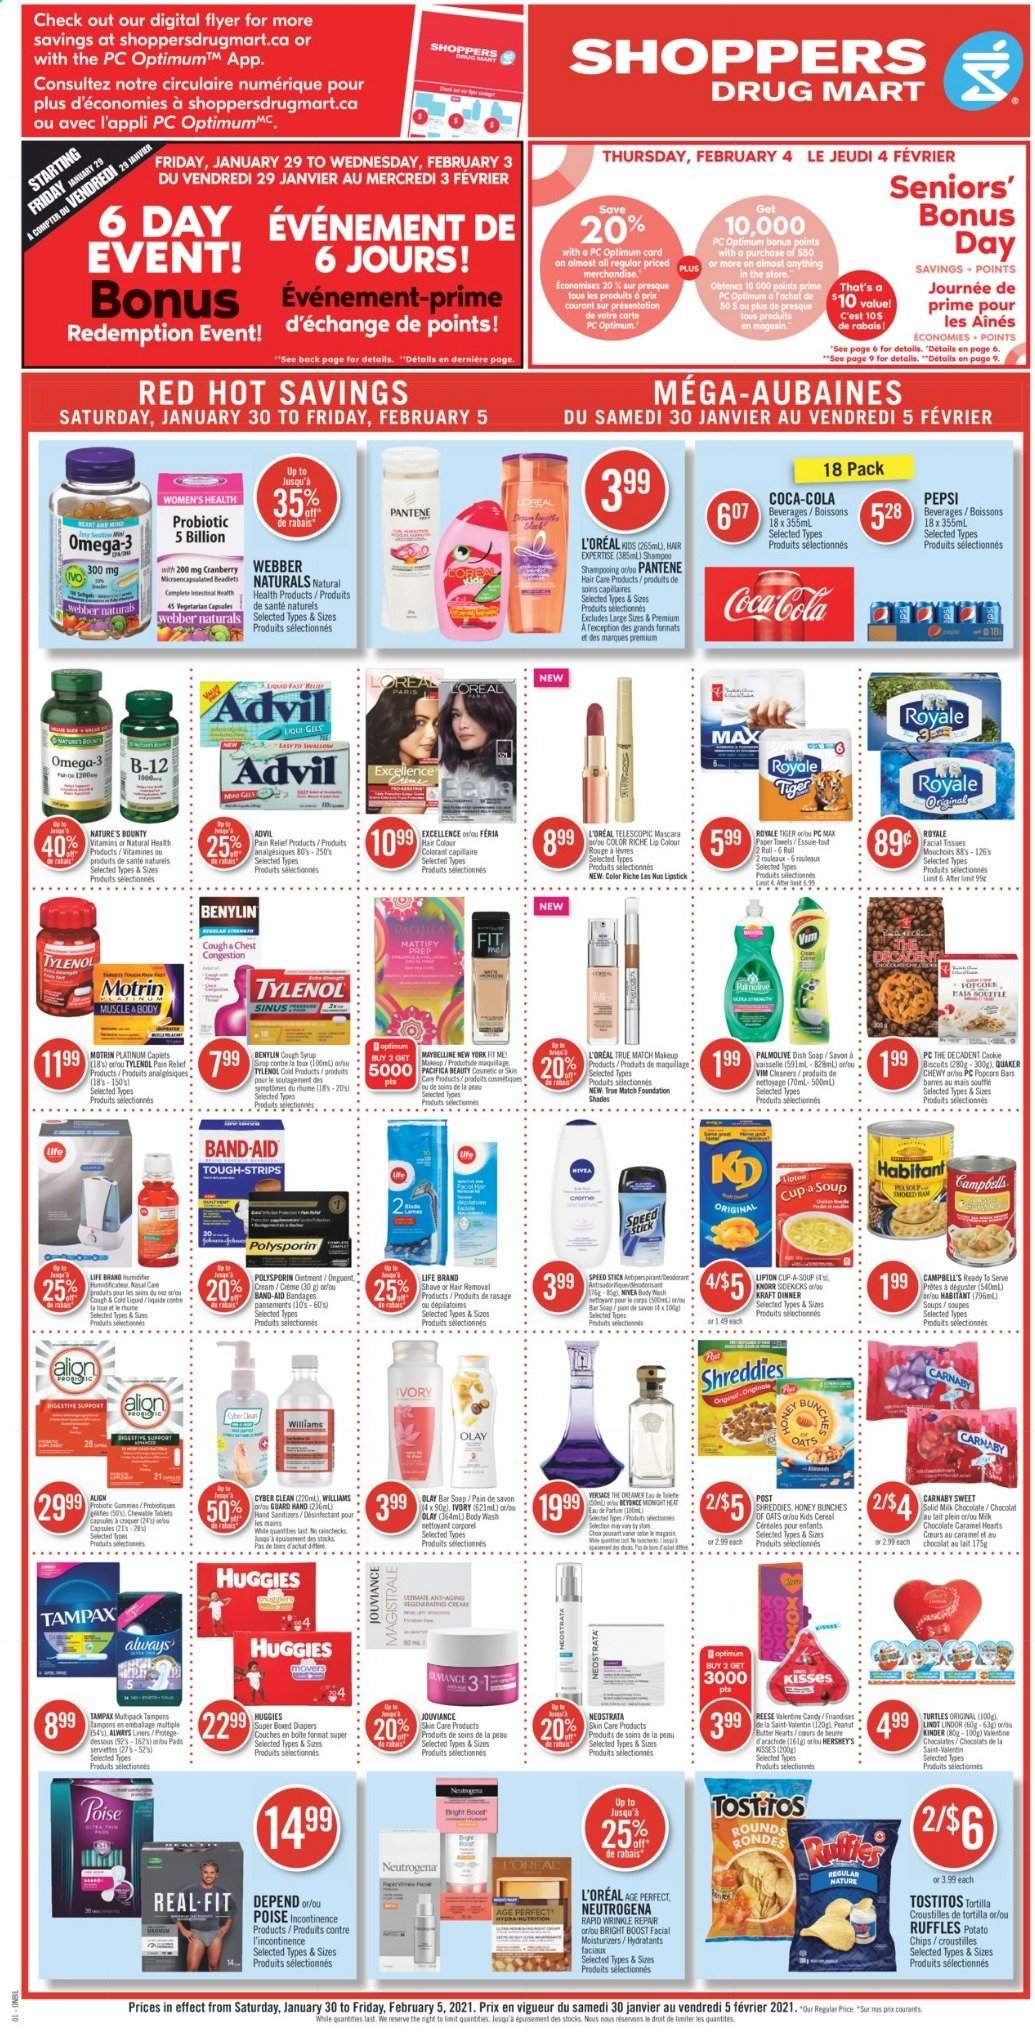 thumbnail - Shoppers Drug Mart Flyer - January 30, 2021 - February 05, 2021 - Sales products - milk chocolate, chocolate, Hershey's, biscuit, tortillas, potato chips, Ruffles, Tostitos, soup, cereals, Quaker, Campbell's, caramel, Kraft®, peanut butter, syrup, Coca-Cola, Pepsi, Boost, nappies, tissues, Always liners, kitchen towels, paper towels, body wash, Palmolive, soap bar, soap, tampons, facial tissues, L’Oréal, moisturizer, Olay, hair color, anti-perspirant, Speed Stick, hair removal, lipstick, makeup, pain relief, Nature's Bounty, Tylenol, Omega-3, Advil Rapid, Benylin, Motrin, Knorr, mascara, Maybelline, Neutrogena, shampoo, Tampax, Versace, Huggies, Pantene, chips, deodorant. Page 1.